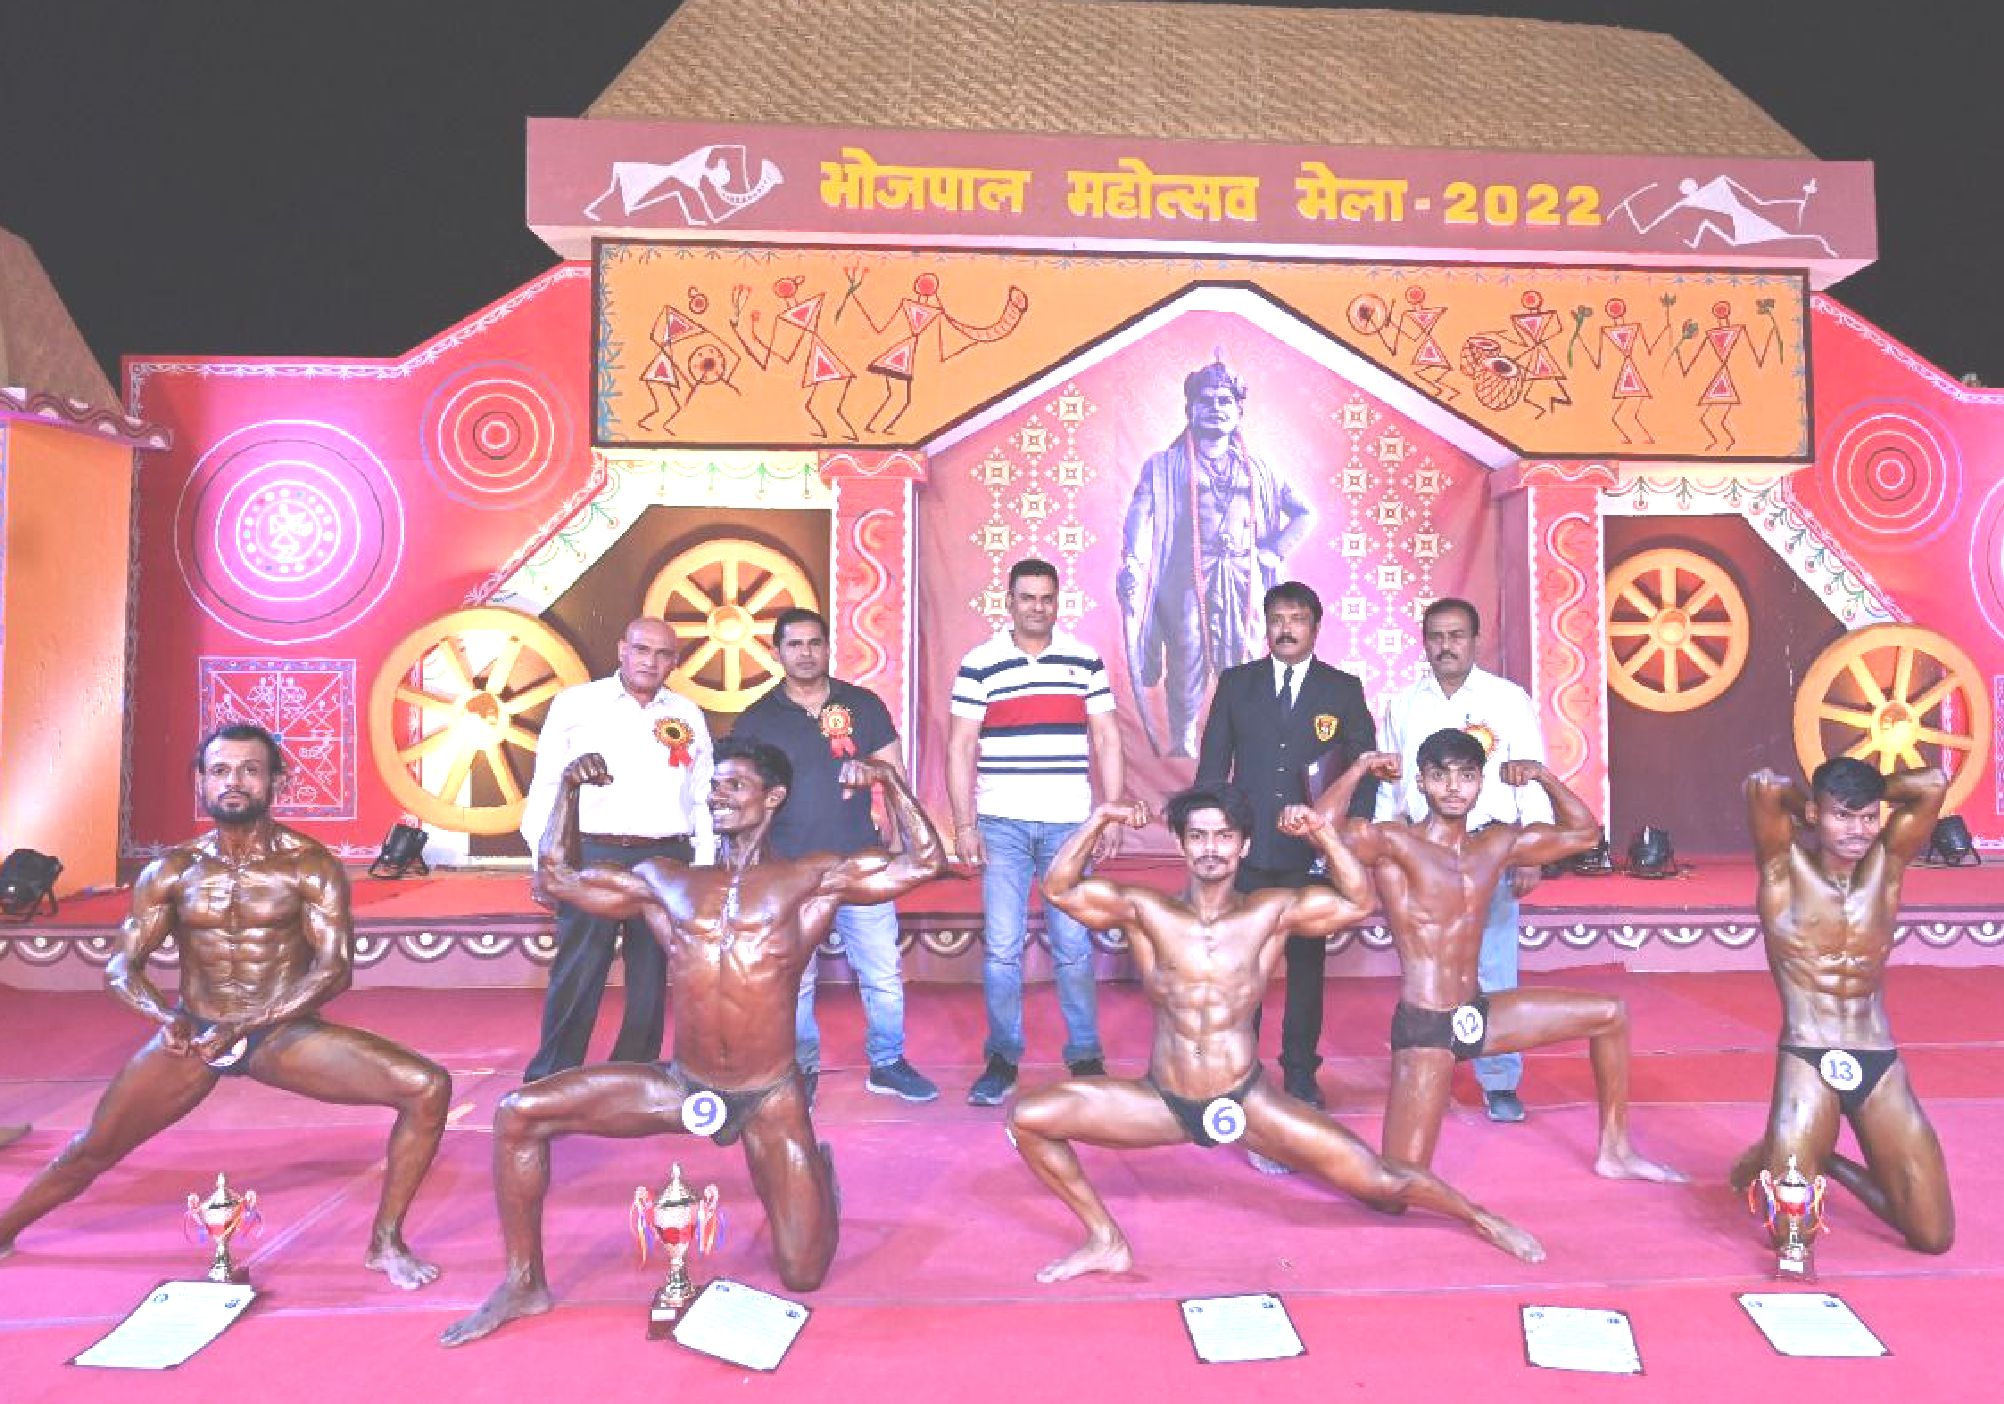 Burhanpur's body builder defeated wrestlers from across the state